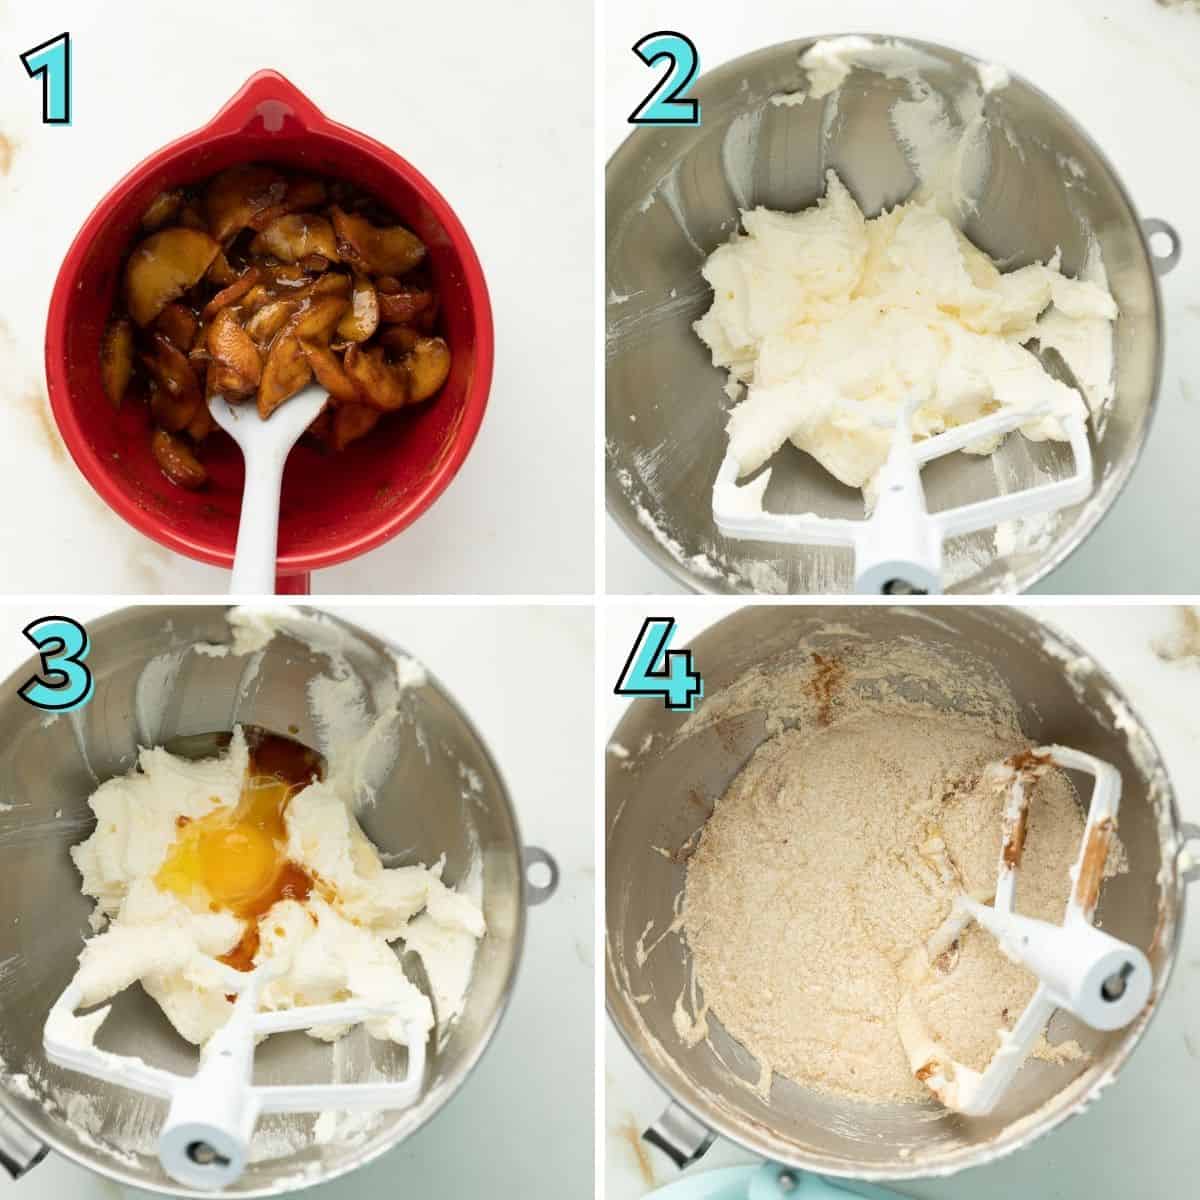 First part of step-by-step instructions to make peach pound cake.